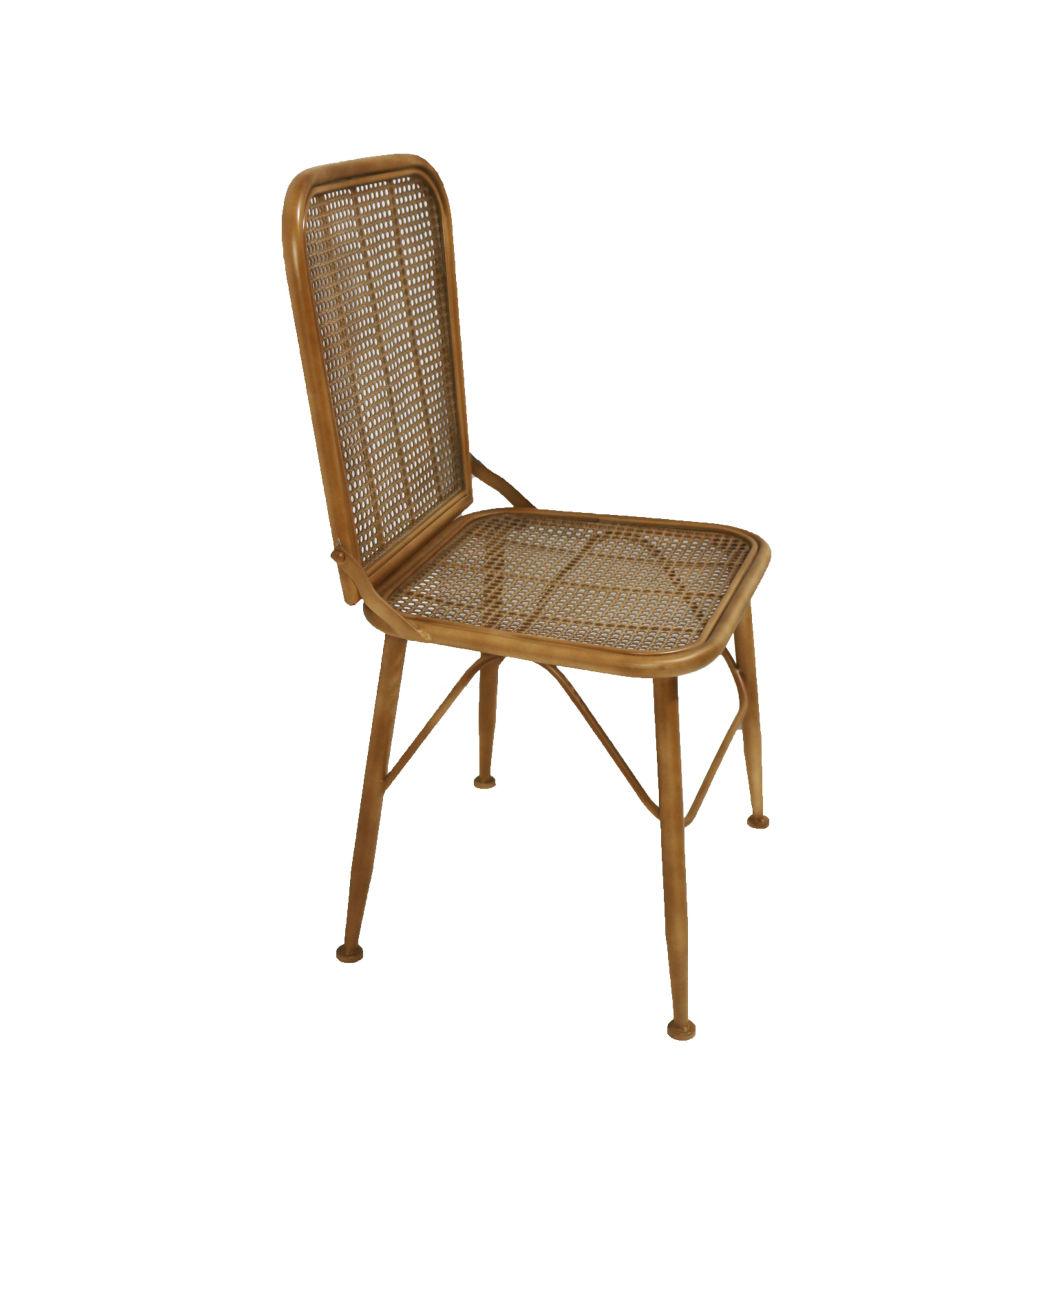 Supplying Living Room Chairs with Antique Style Made in China